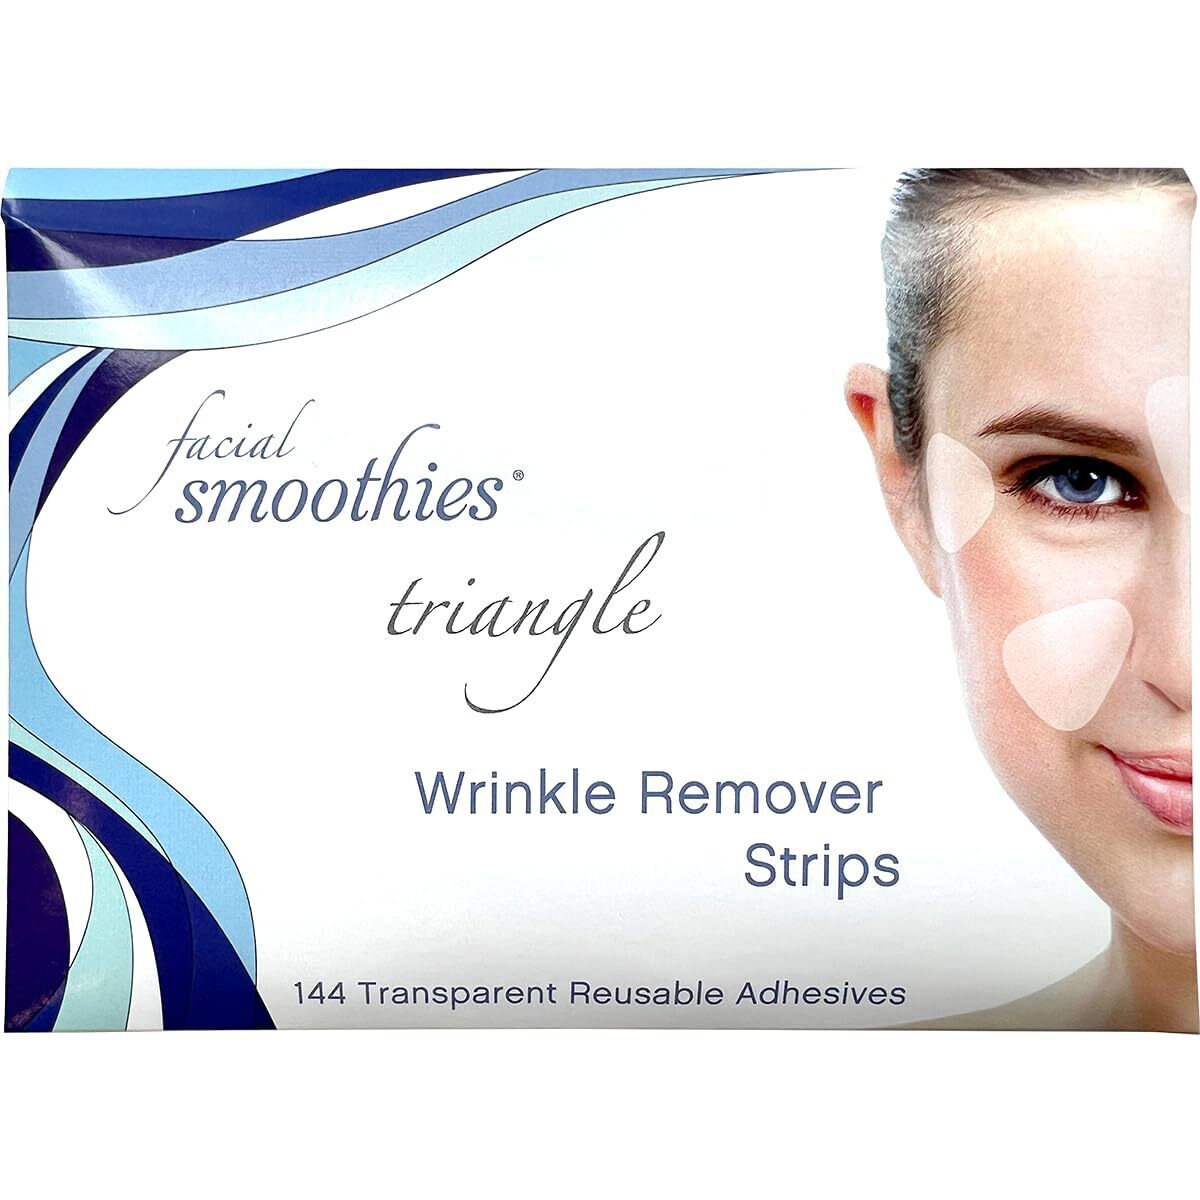 Smoothies Facial TRIANGLE Wrinkle Remover Strips, 144 Patches 